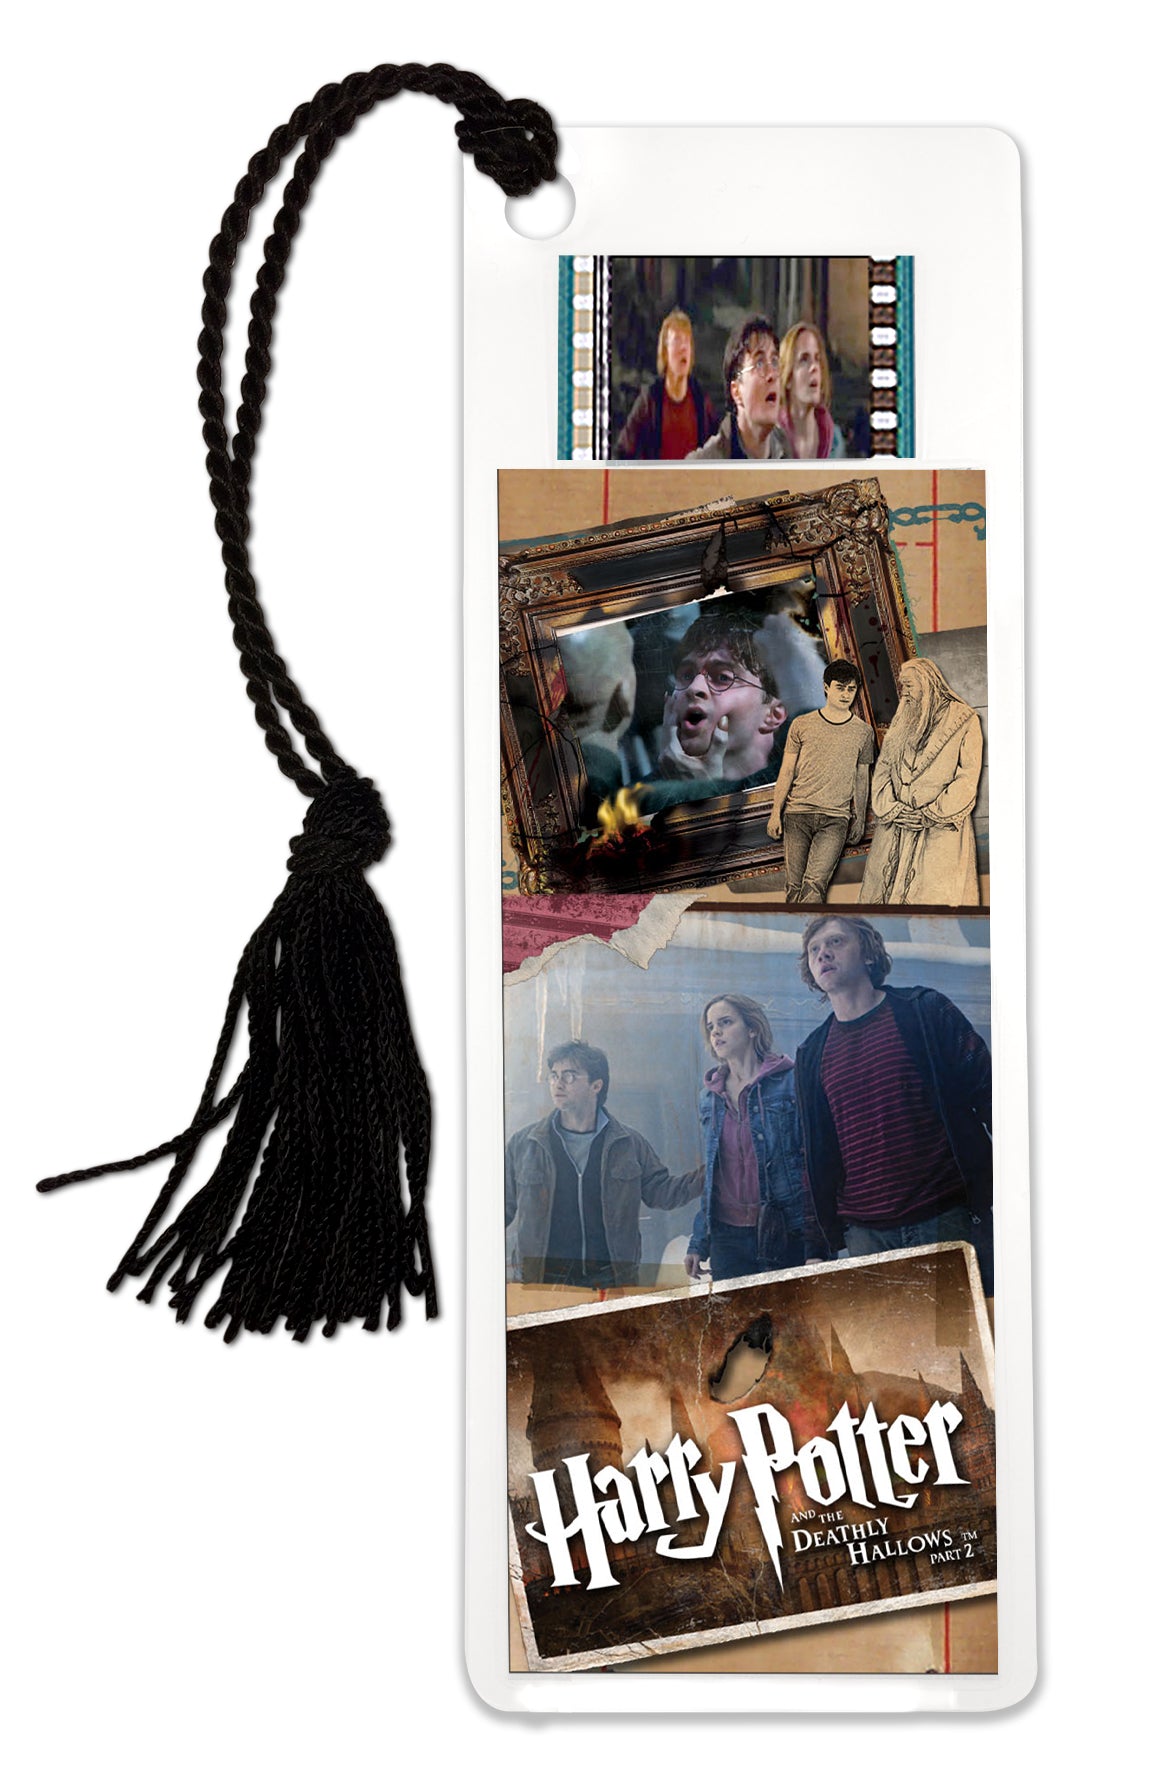 Harry Potter and the Deathly Hallows: Part 2 (The Final Duel) FilmCells™ Bookmark USBM594